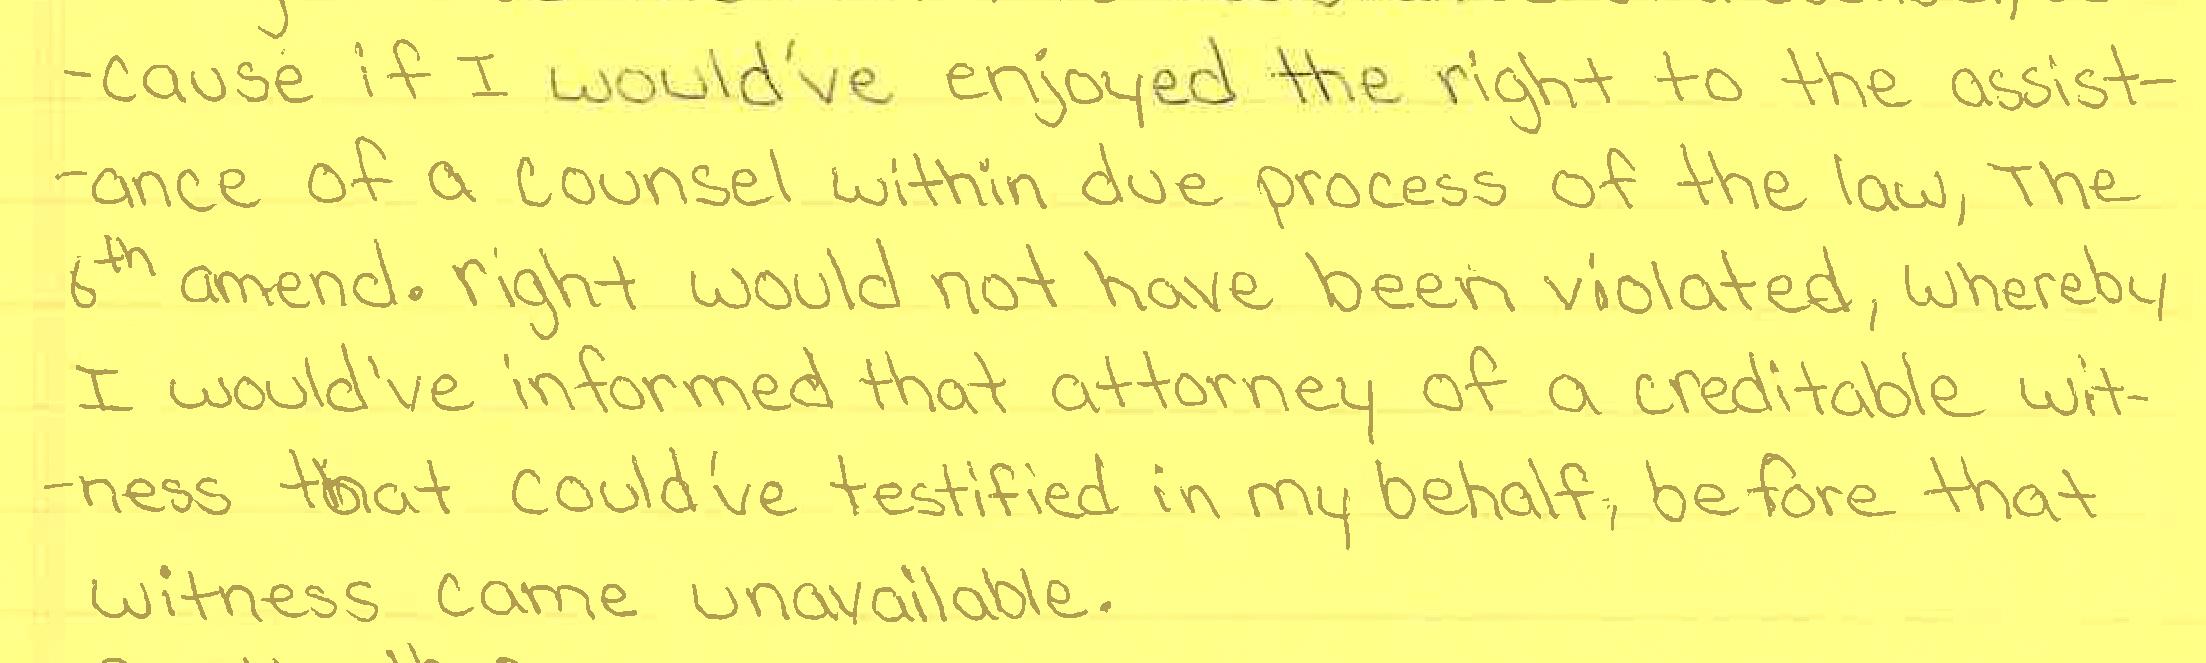 A scan of a written letter on yellow paper that reads: “...cause if I would’ve enjoyed the right to the assistance of a counsel within due process of the law, the 6th amend. right would not have been violated, whereby I would’ve informed that attorney of a creditable witness that could’ve testified in my behalf, before that witness came unavailable.”